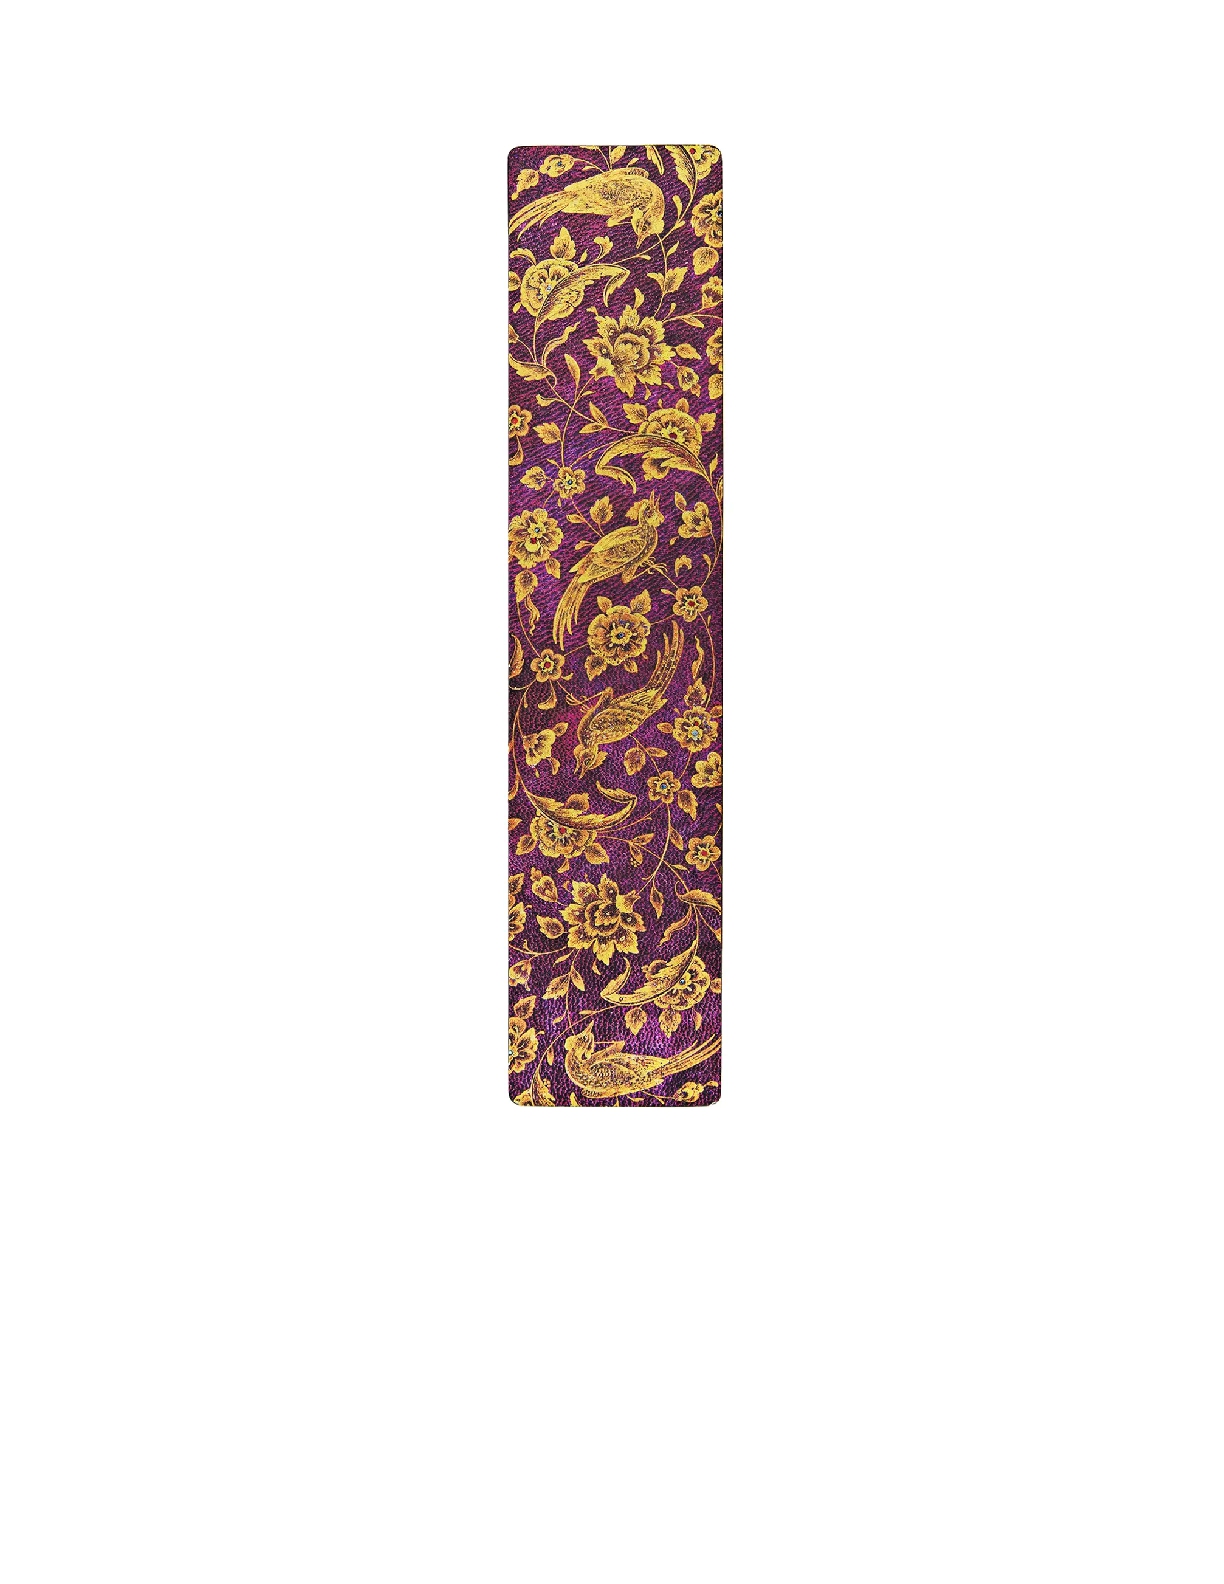 The Orchard, Persian Poetry, Bookmarks, Bookmark